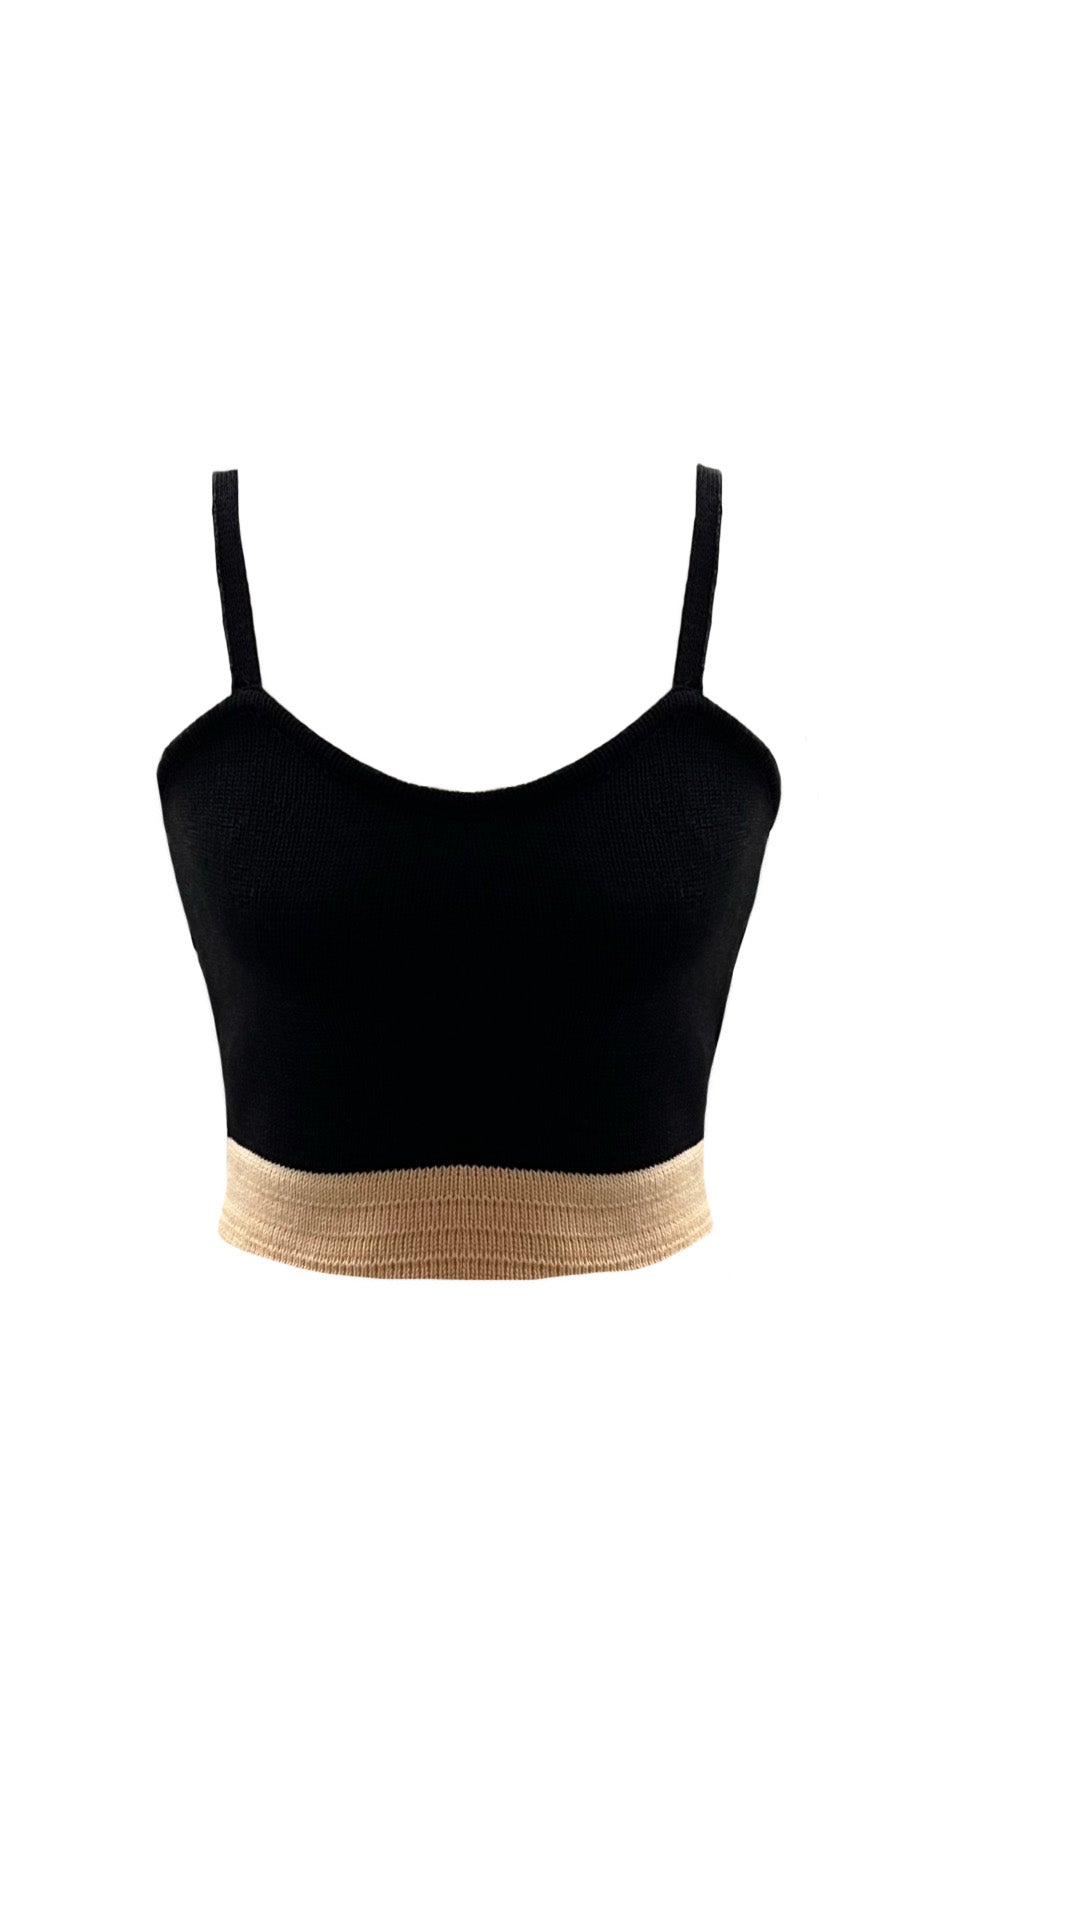 Basic yet most coveted crop-top